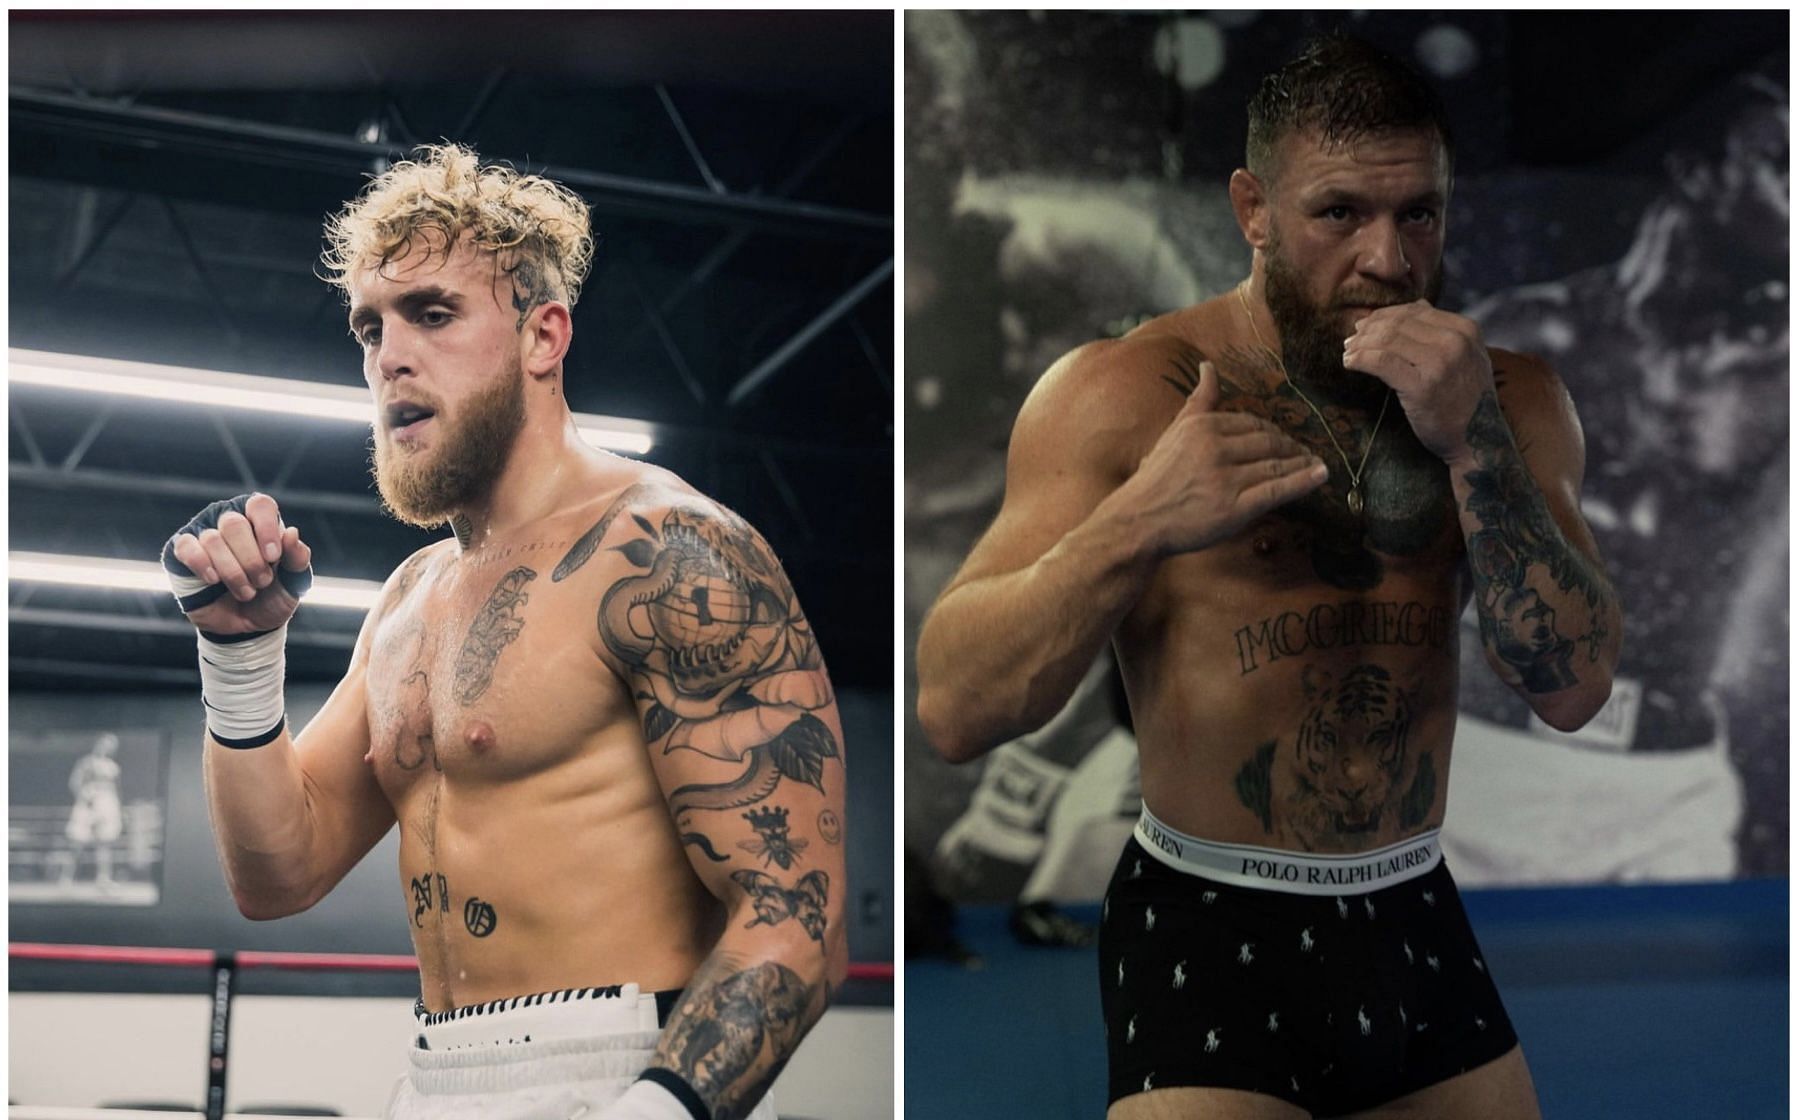 Jake Paul (left) and Conor McGregor (right) - [Images via @thenotoriousmma and @jakepaul on Instagram]